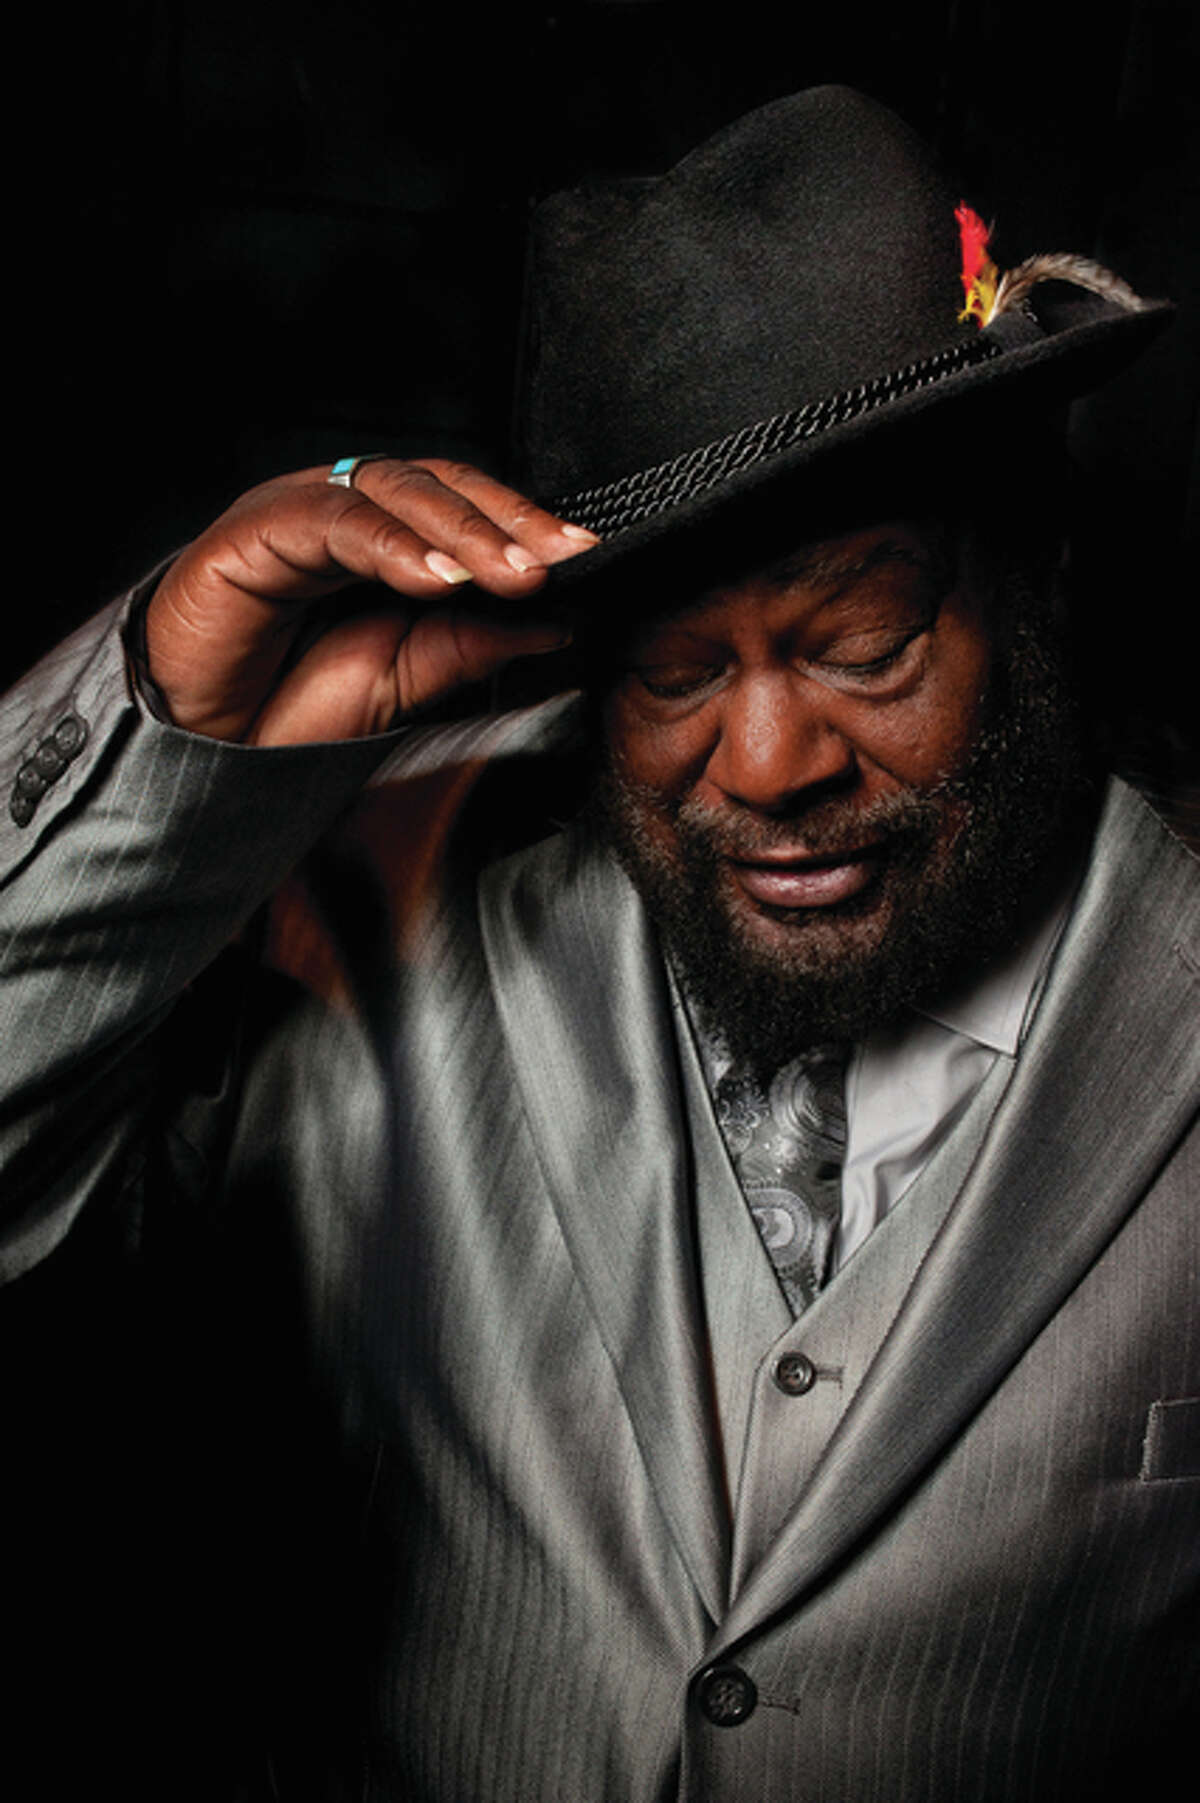 George Clinton, pictured, and Parliament Funkadelic will funk it out at Fair Saint Louis.